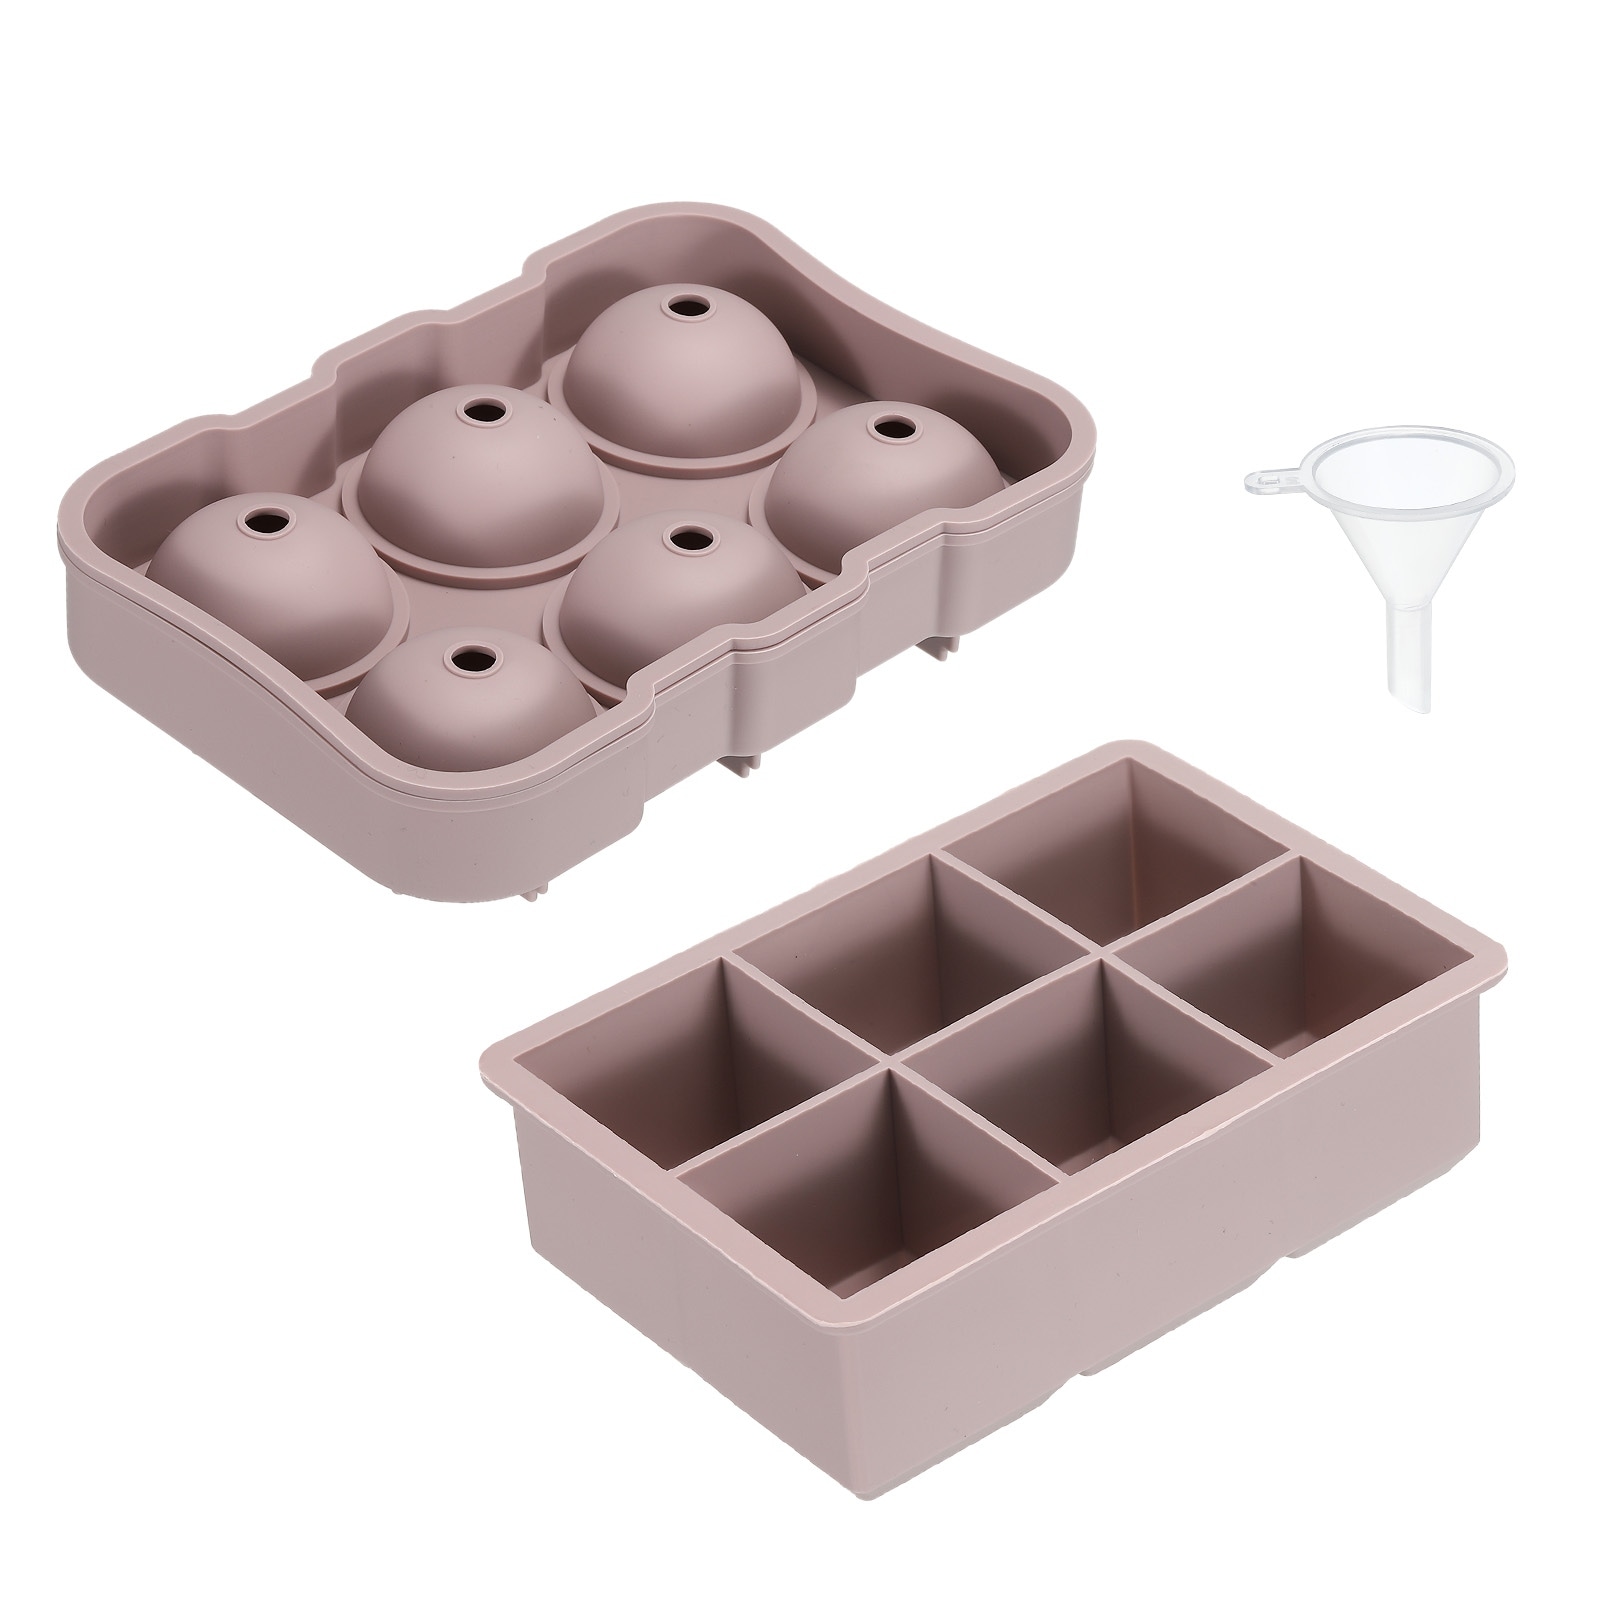 https://ak1.ostkcdn.com/images/products/is/images/direct/1630c587ac9d66be3ce0fd492757067e29cac14d/Ice-Cube-Tray%28Set-of-2%29%2C-Pink-Sphere-Ice-Ball-Maker-%26-Square-Ice-Cube-Maker.jpg